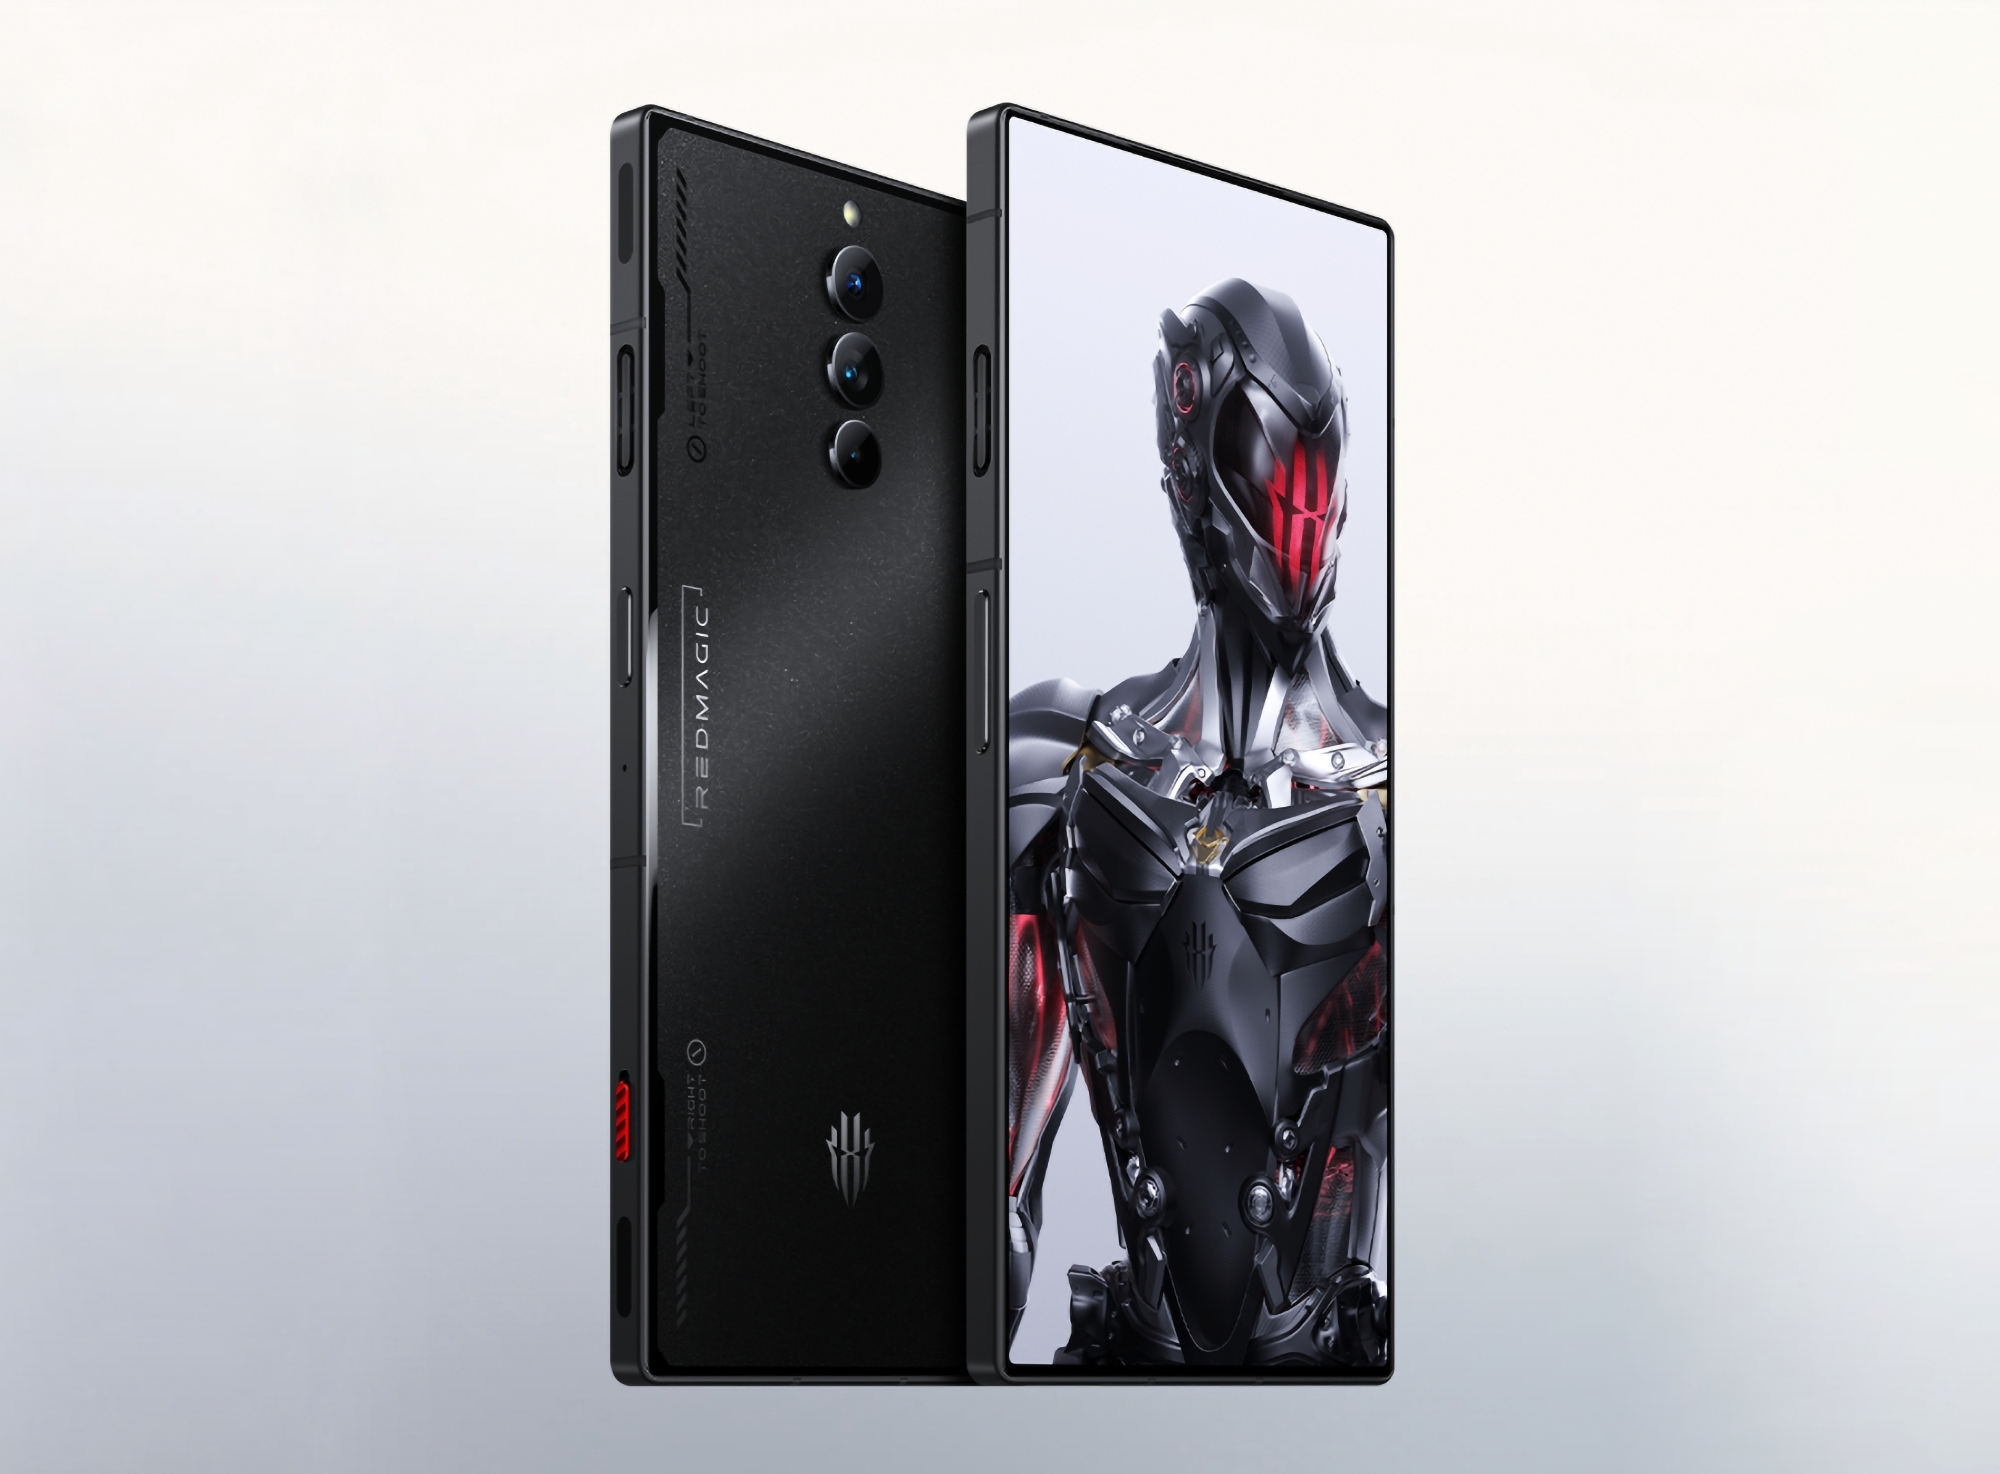 From 0 to 100% in 14 minutes: Nubia Red Magic 8 Pro gaming smartphone will get a 6000 mAh battery with 165W charging support